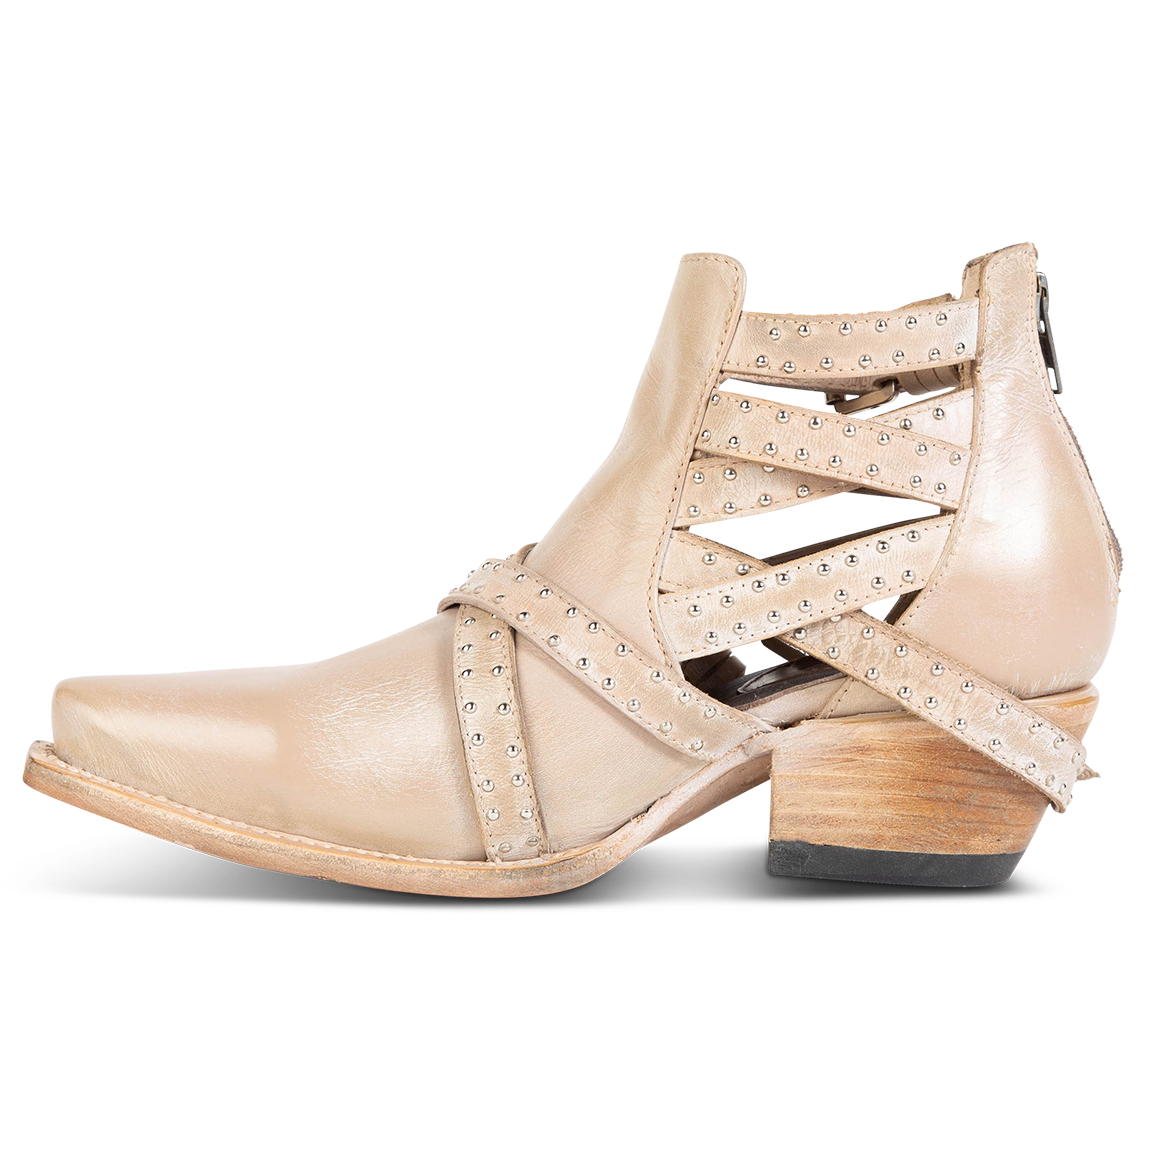 Inside view showing adjustable buckle straps and exposed sides on FREEBIRD women's Wasp beige ankle bootie